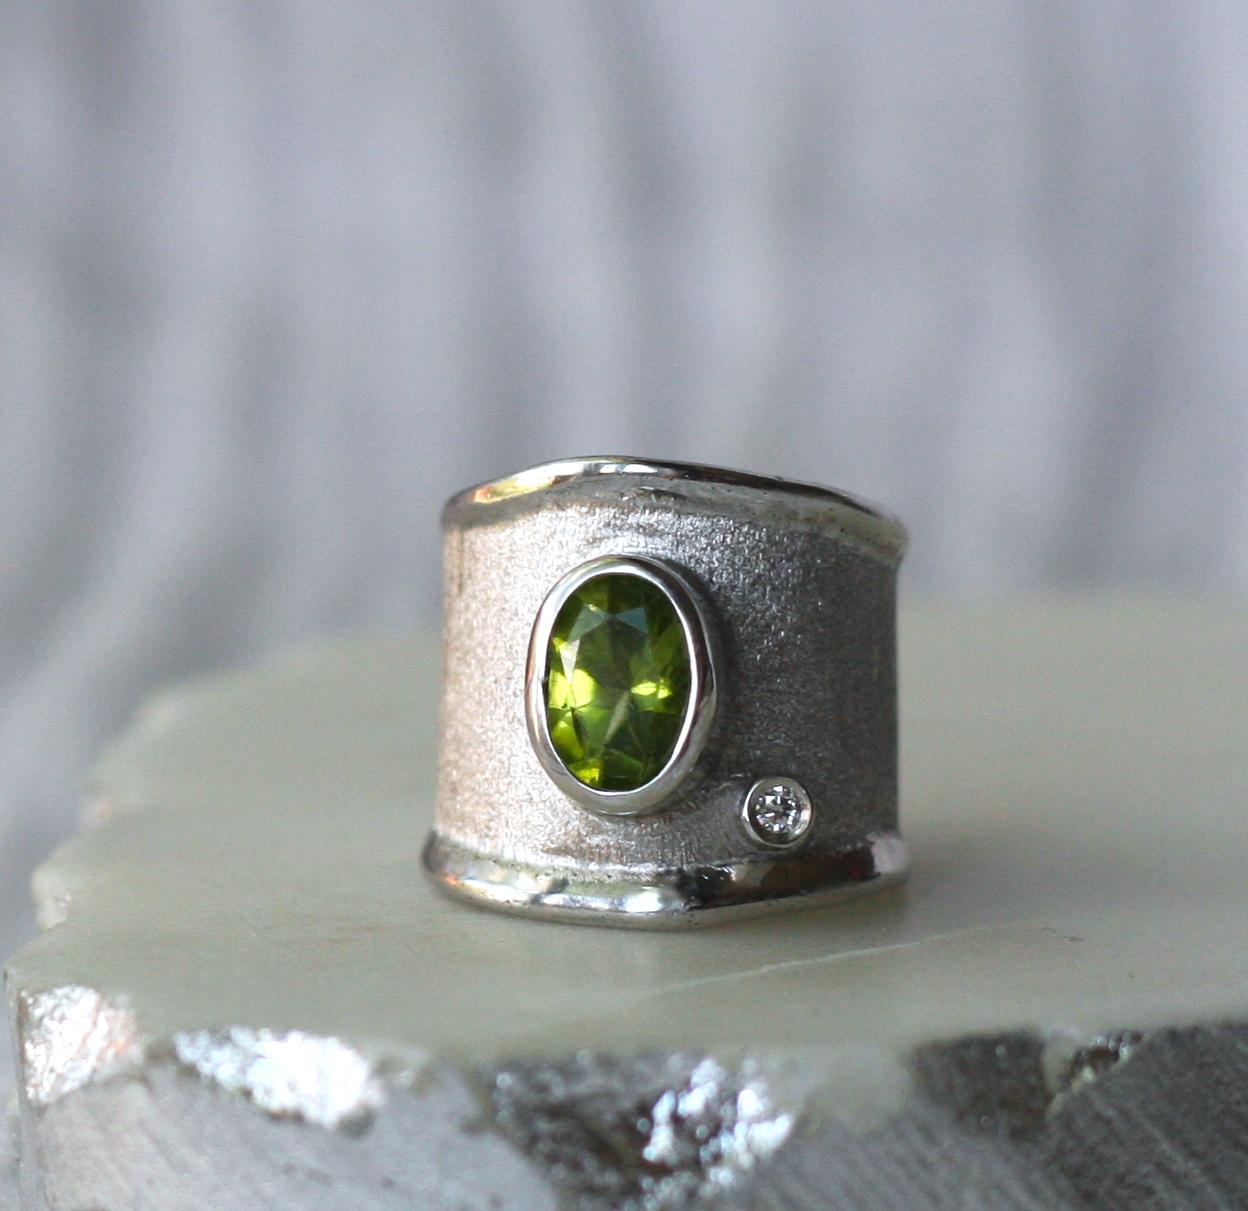 Yianni Creations presents a handmade artisan ring from Ammos Collection all crafted from fine silver 950 purity and plated with palladium to protect it against tarnish. The rin features 2.00 Carat Peridot and 0.03 Carat brilliant cut Diamond